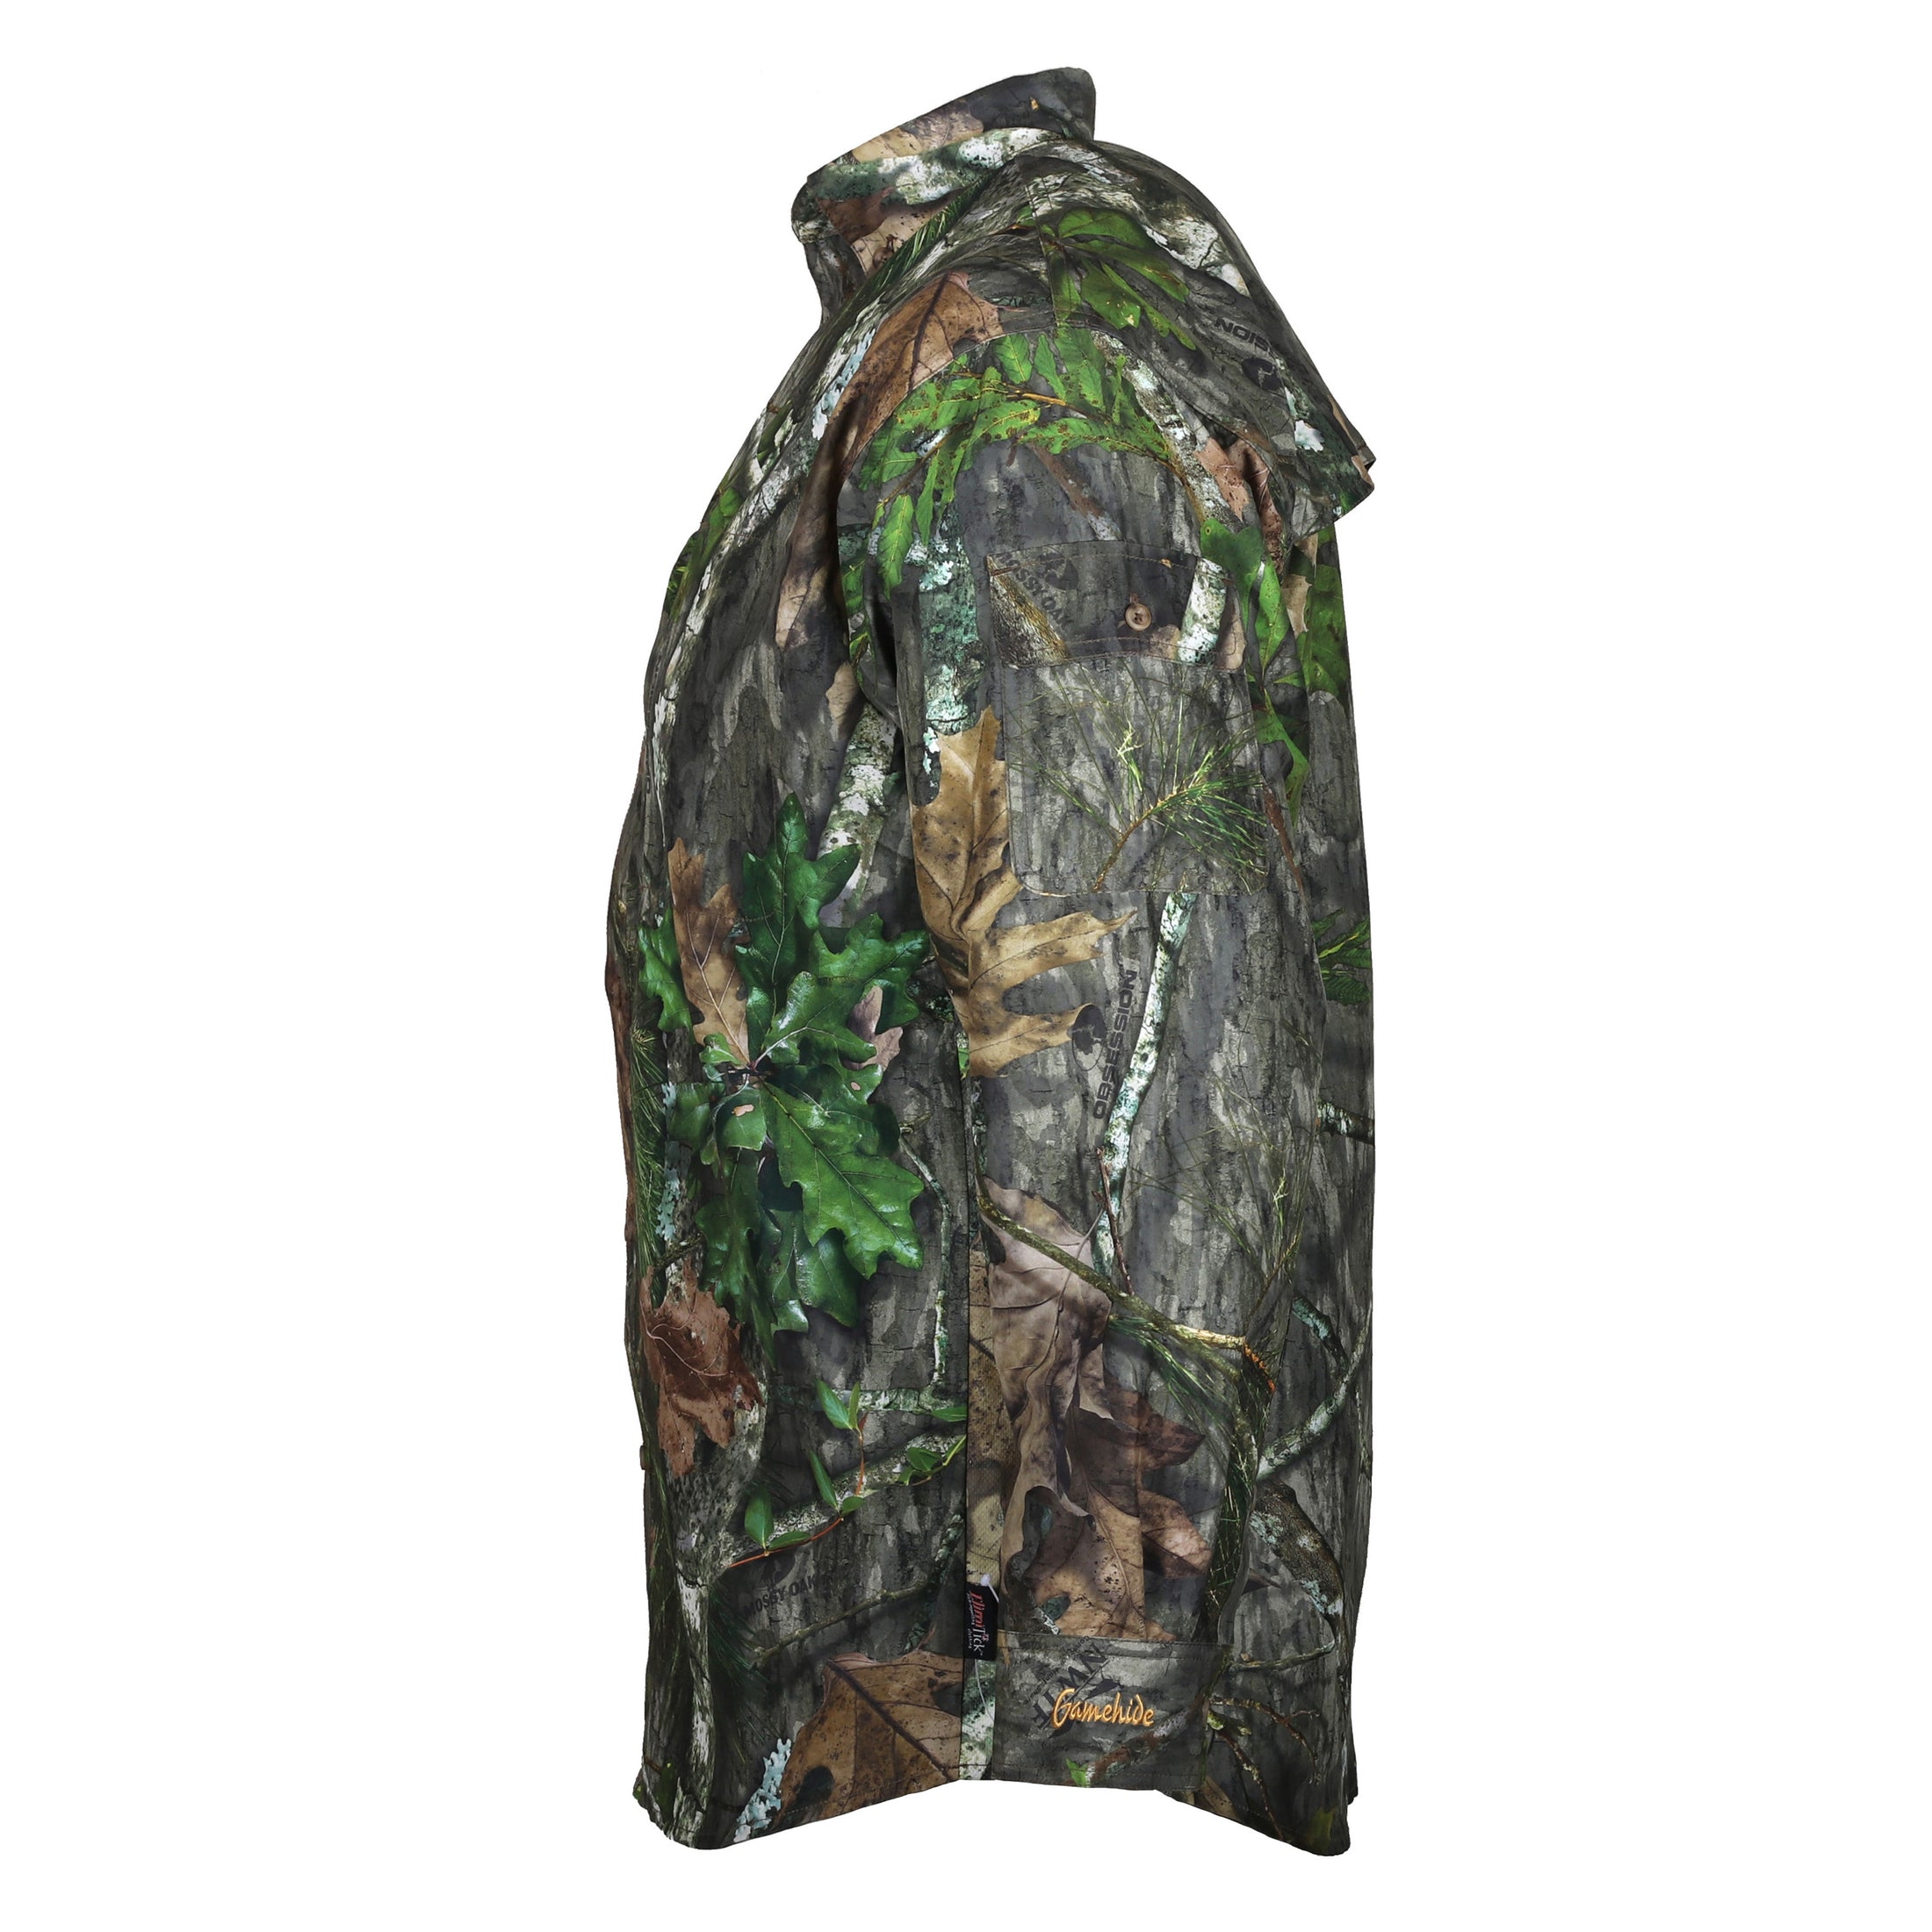 gamehide Elimitick Insect Repellent Ultra Lite Shirt side (mossy oak obsession)